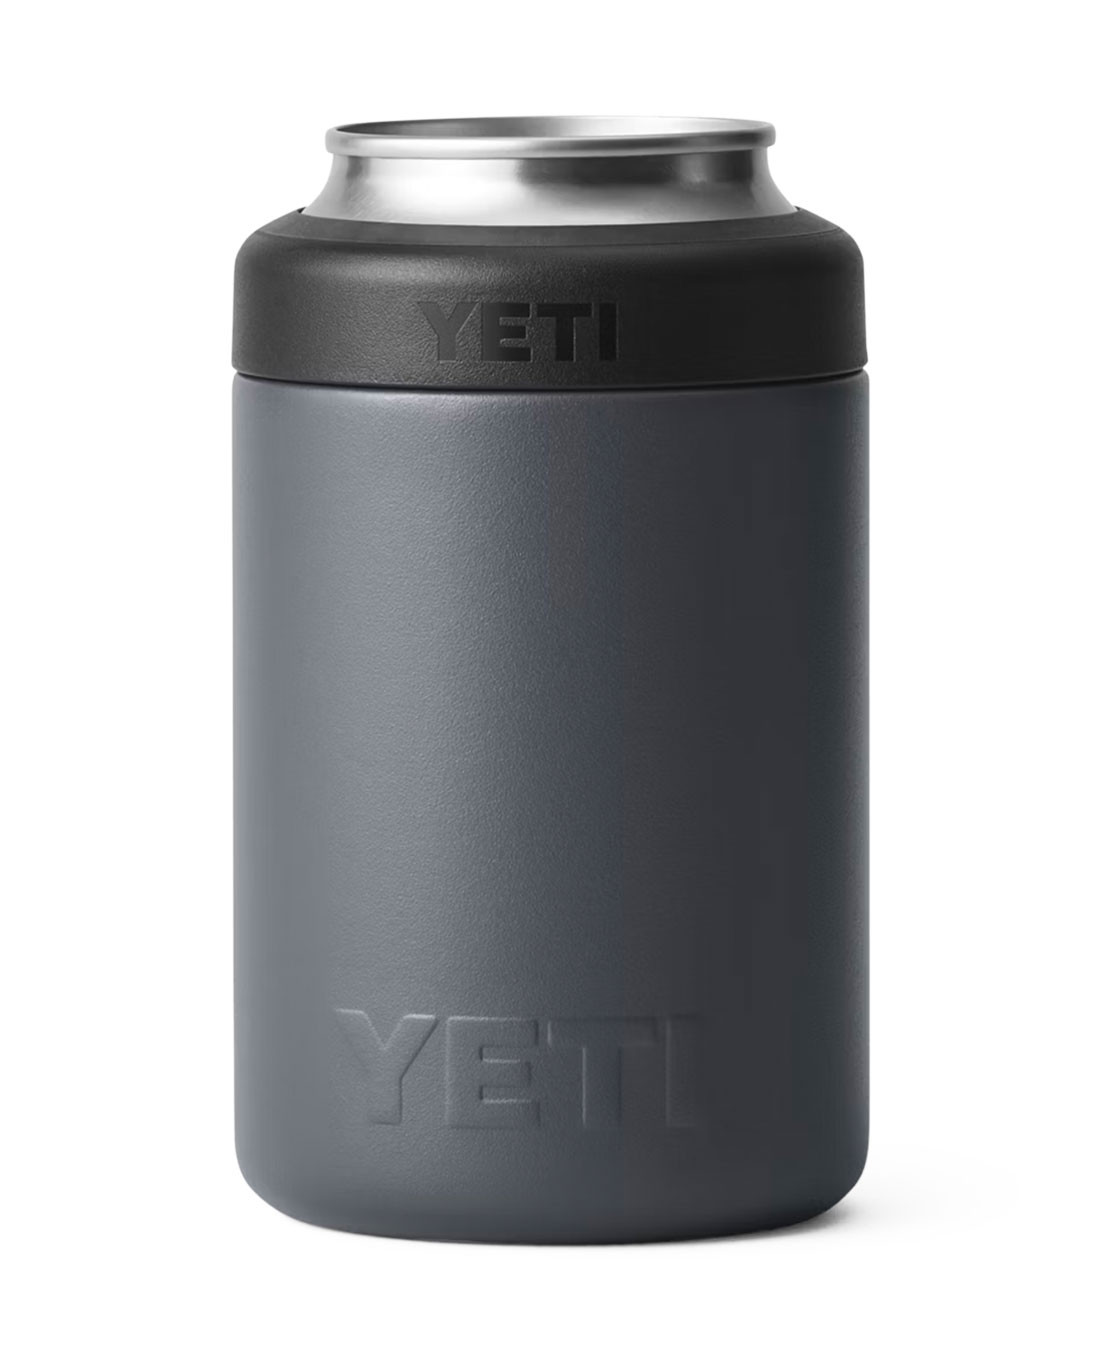 Skin for Yeti Rambler One Gallon Jug - Solid State Black by Solid Colors